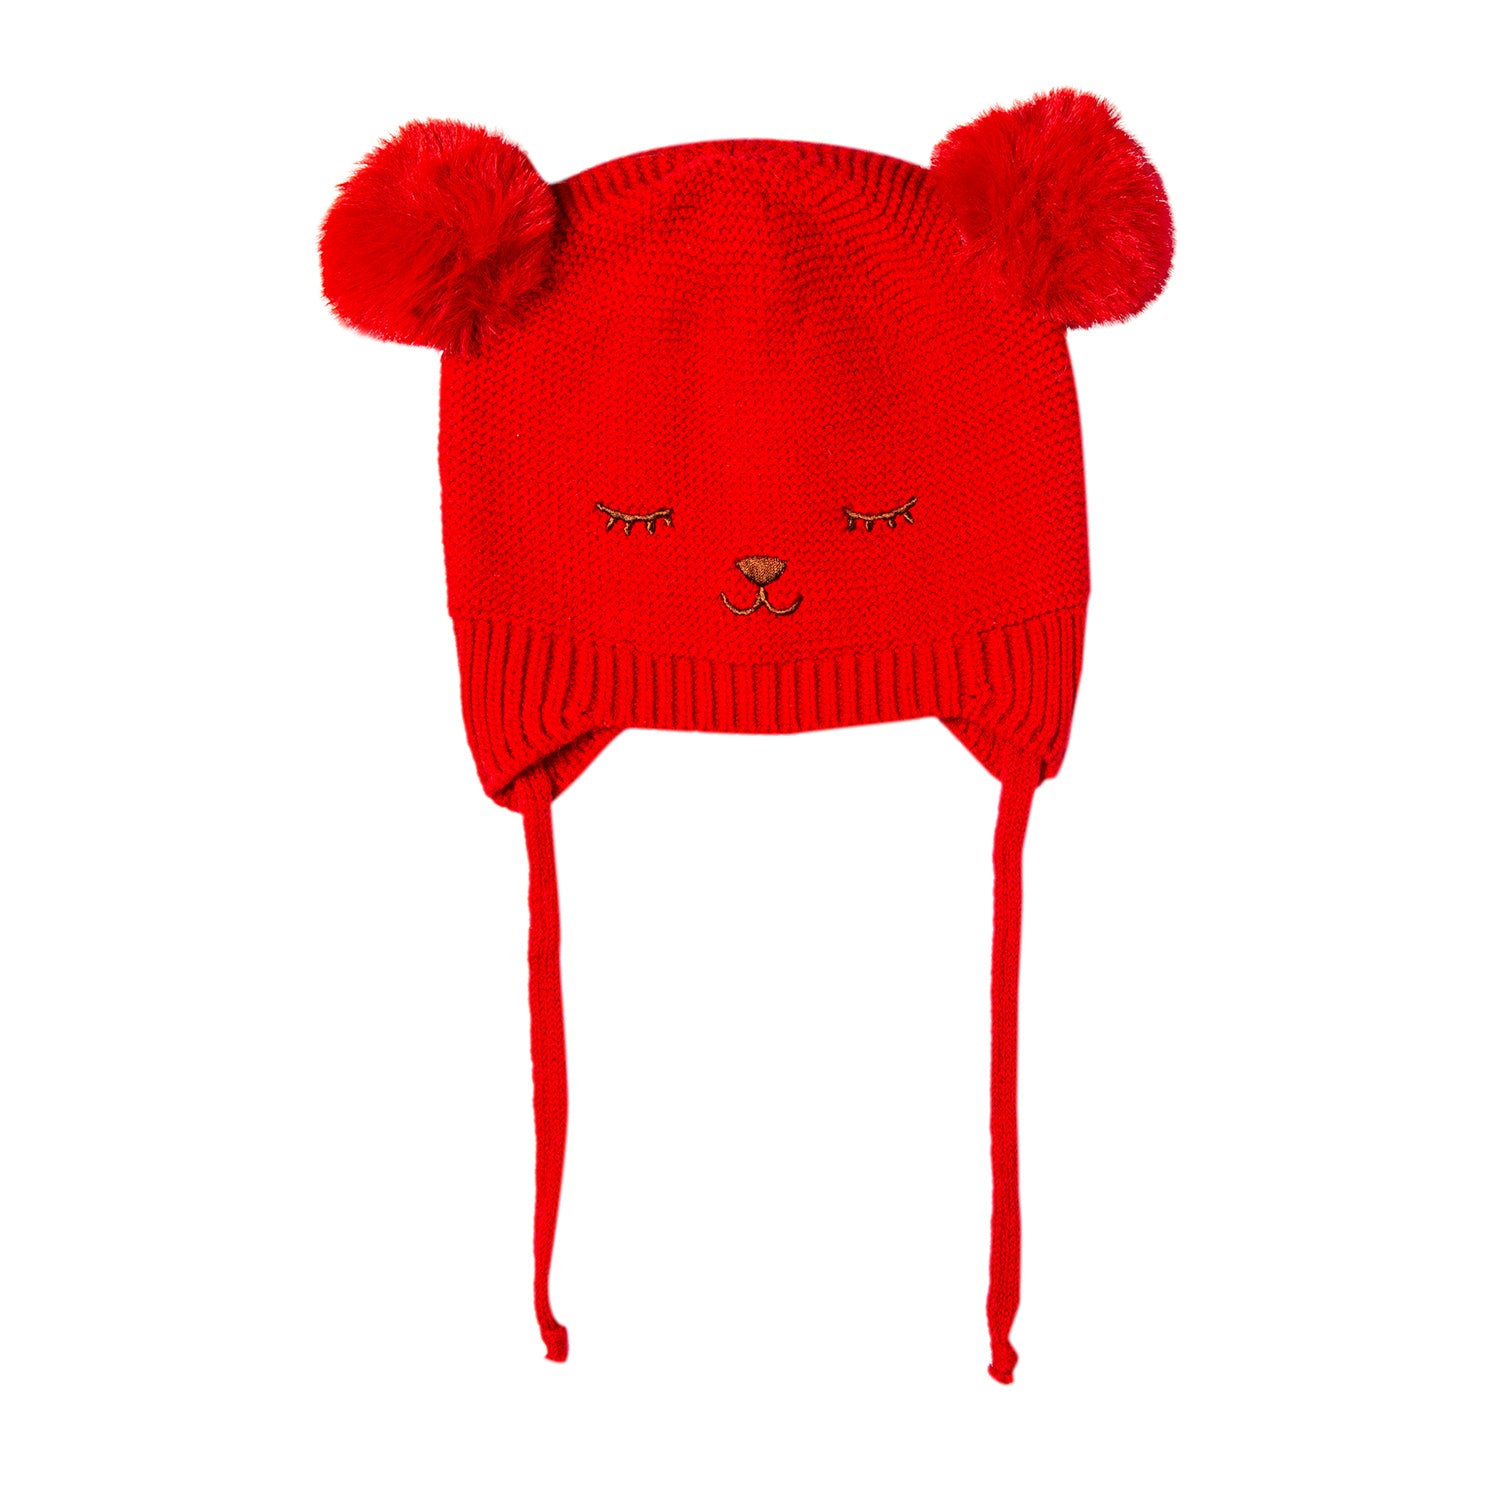 Knit Woollen Cap With Tie Knot For Ear Cover Sleeping Pom Pom Red